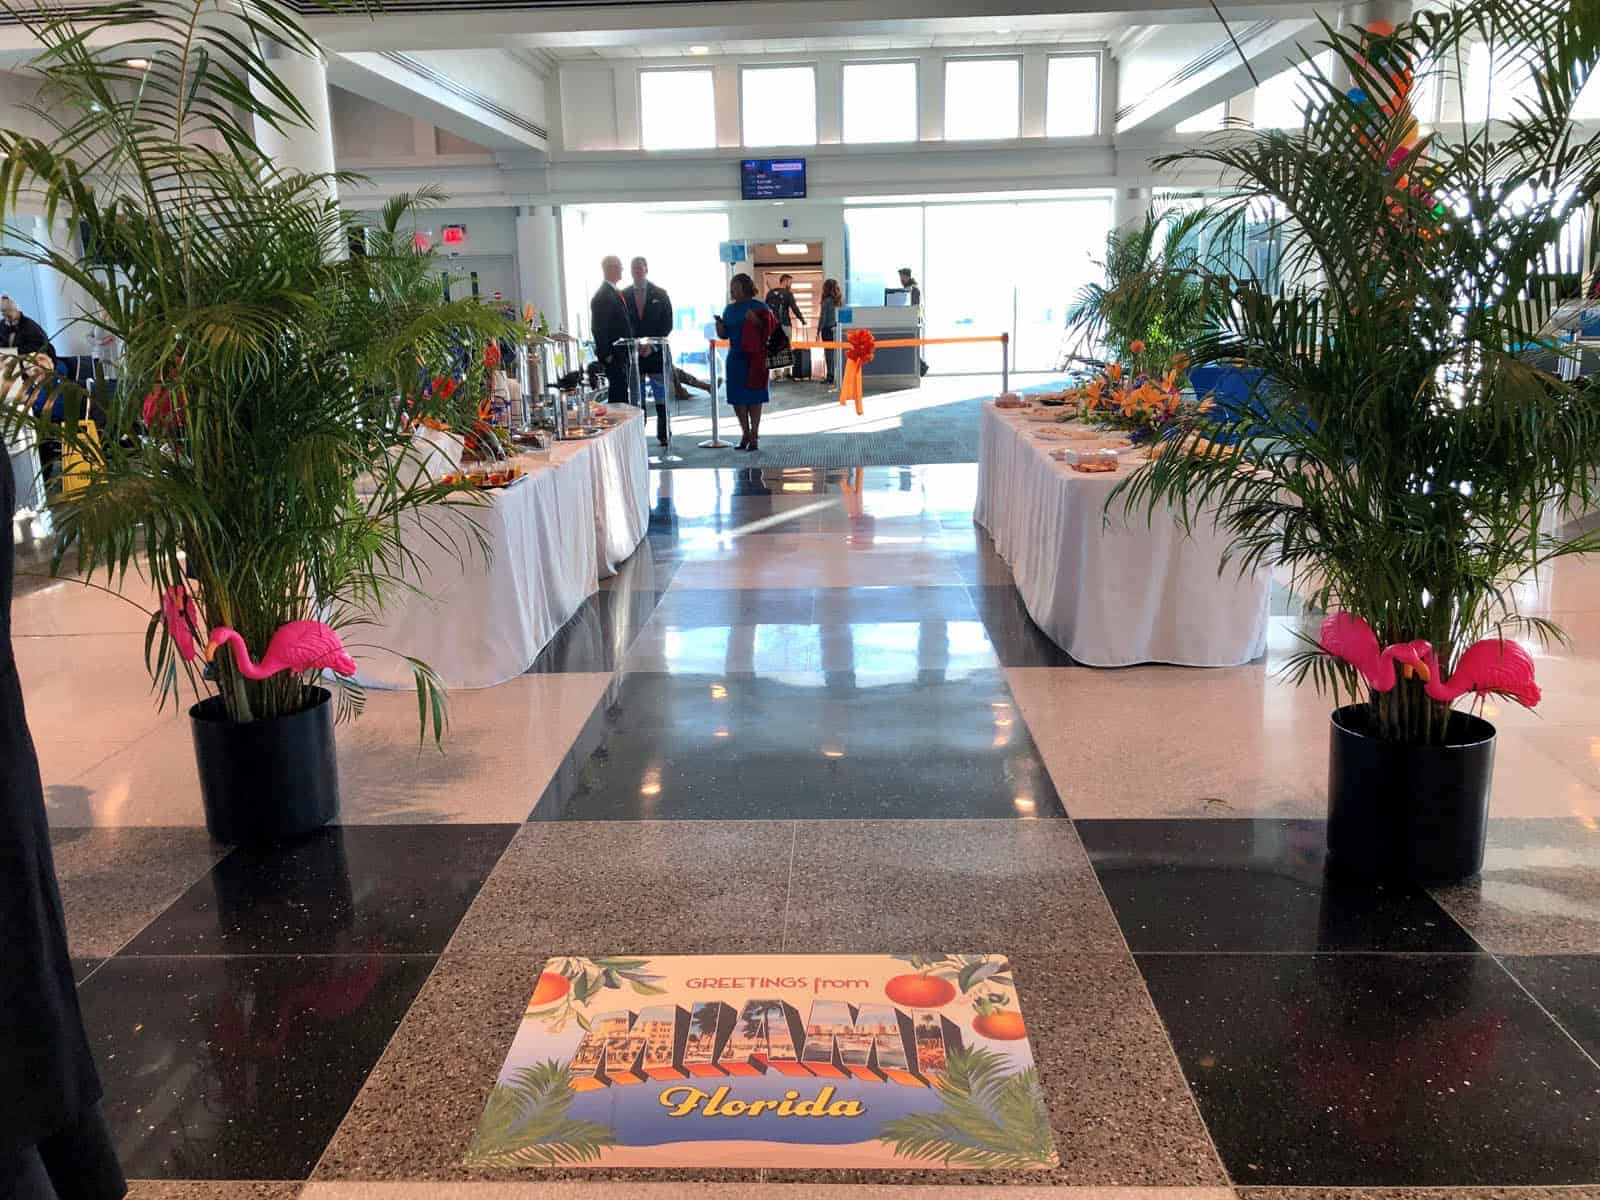 CAE Airport to Miami route launch event decorations